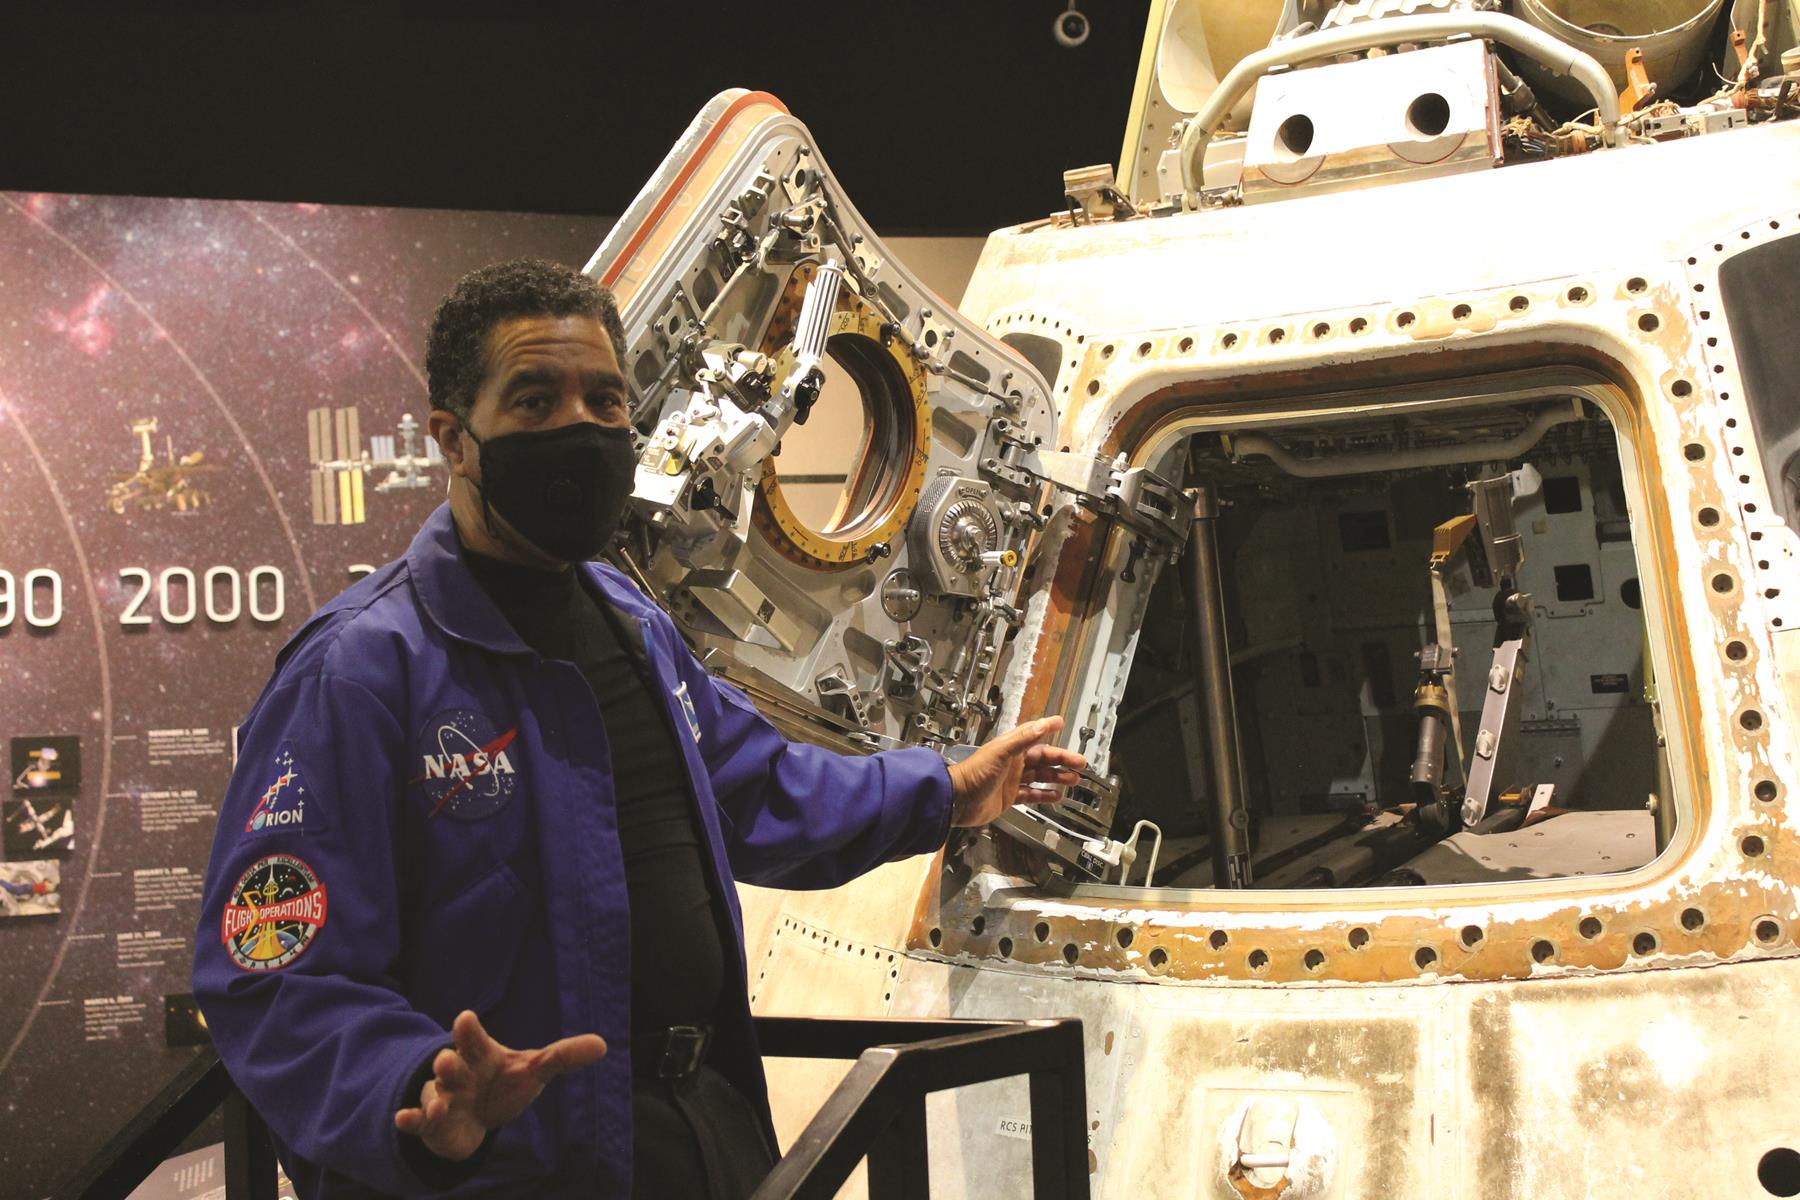 A STEM Learning staffer, JonDarr Bradshaw, conducts a “Capsule Chat” alongside the Apollo Command Module.